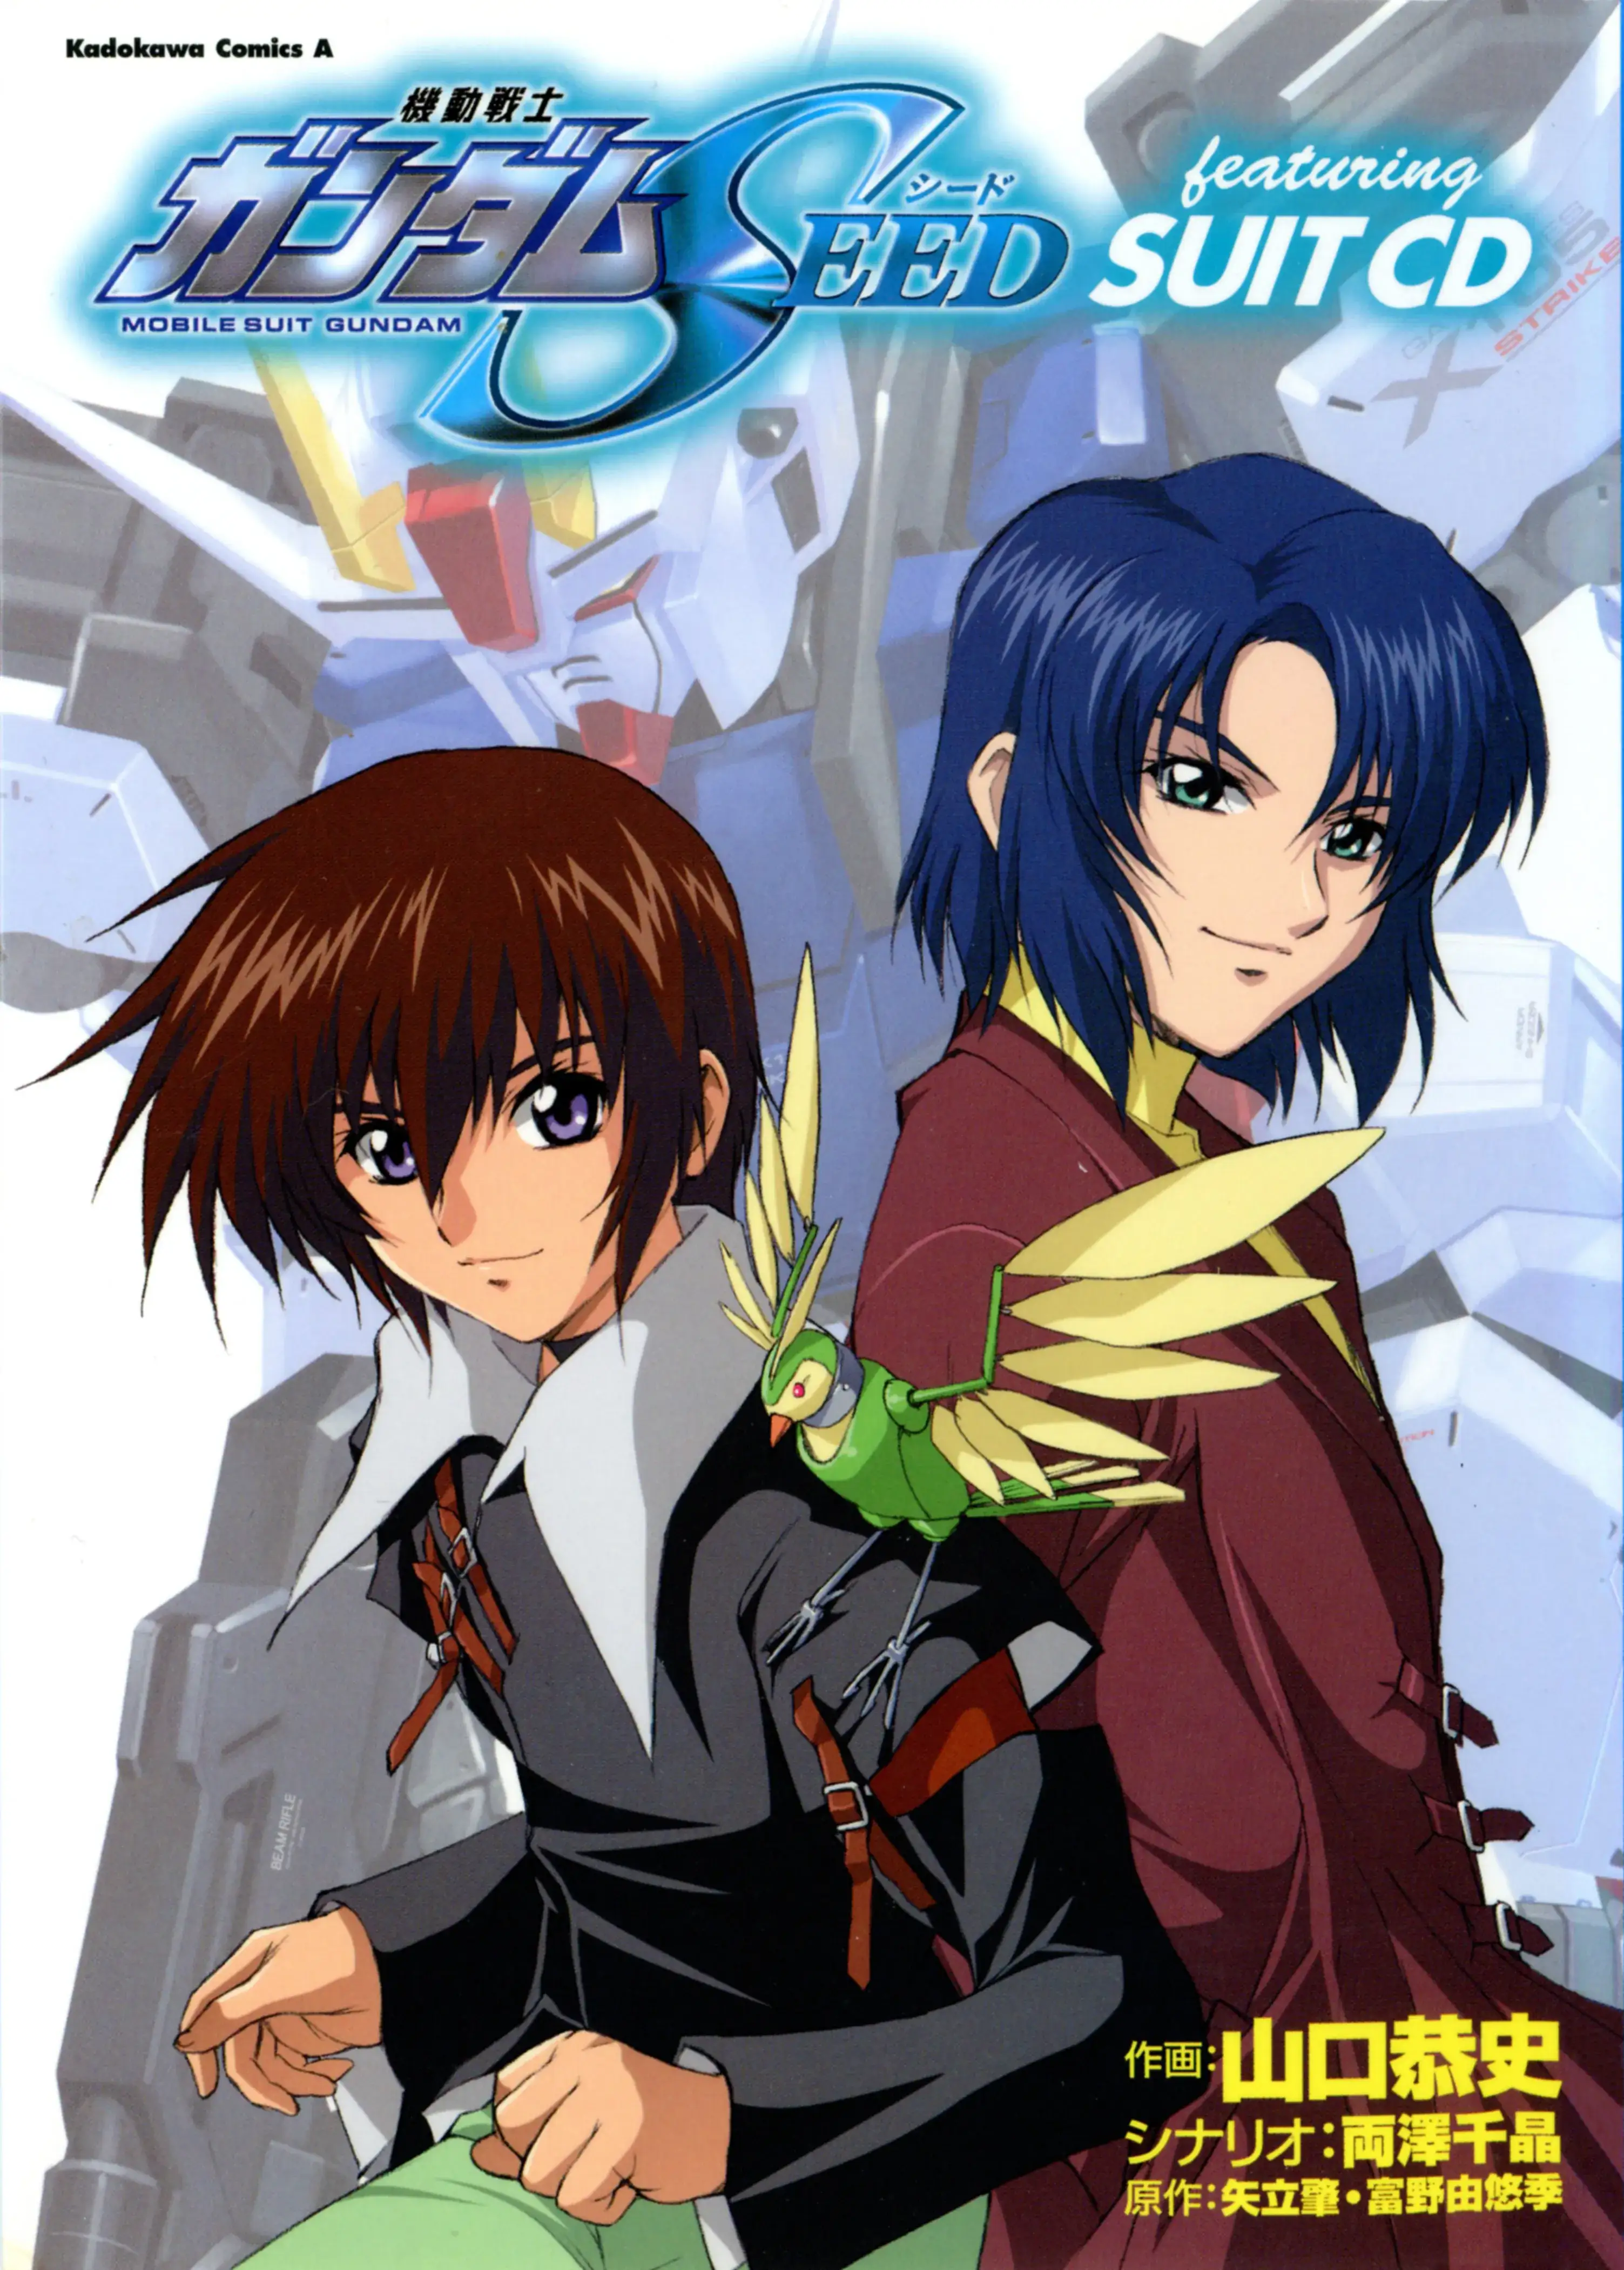 MOBILE SUIT GUNDAM SEED FEATURING SUIT CD THUMBNAIL